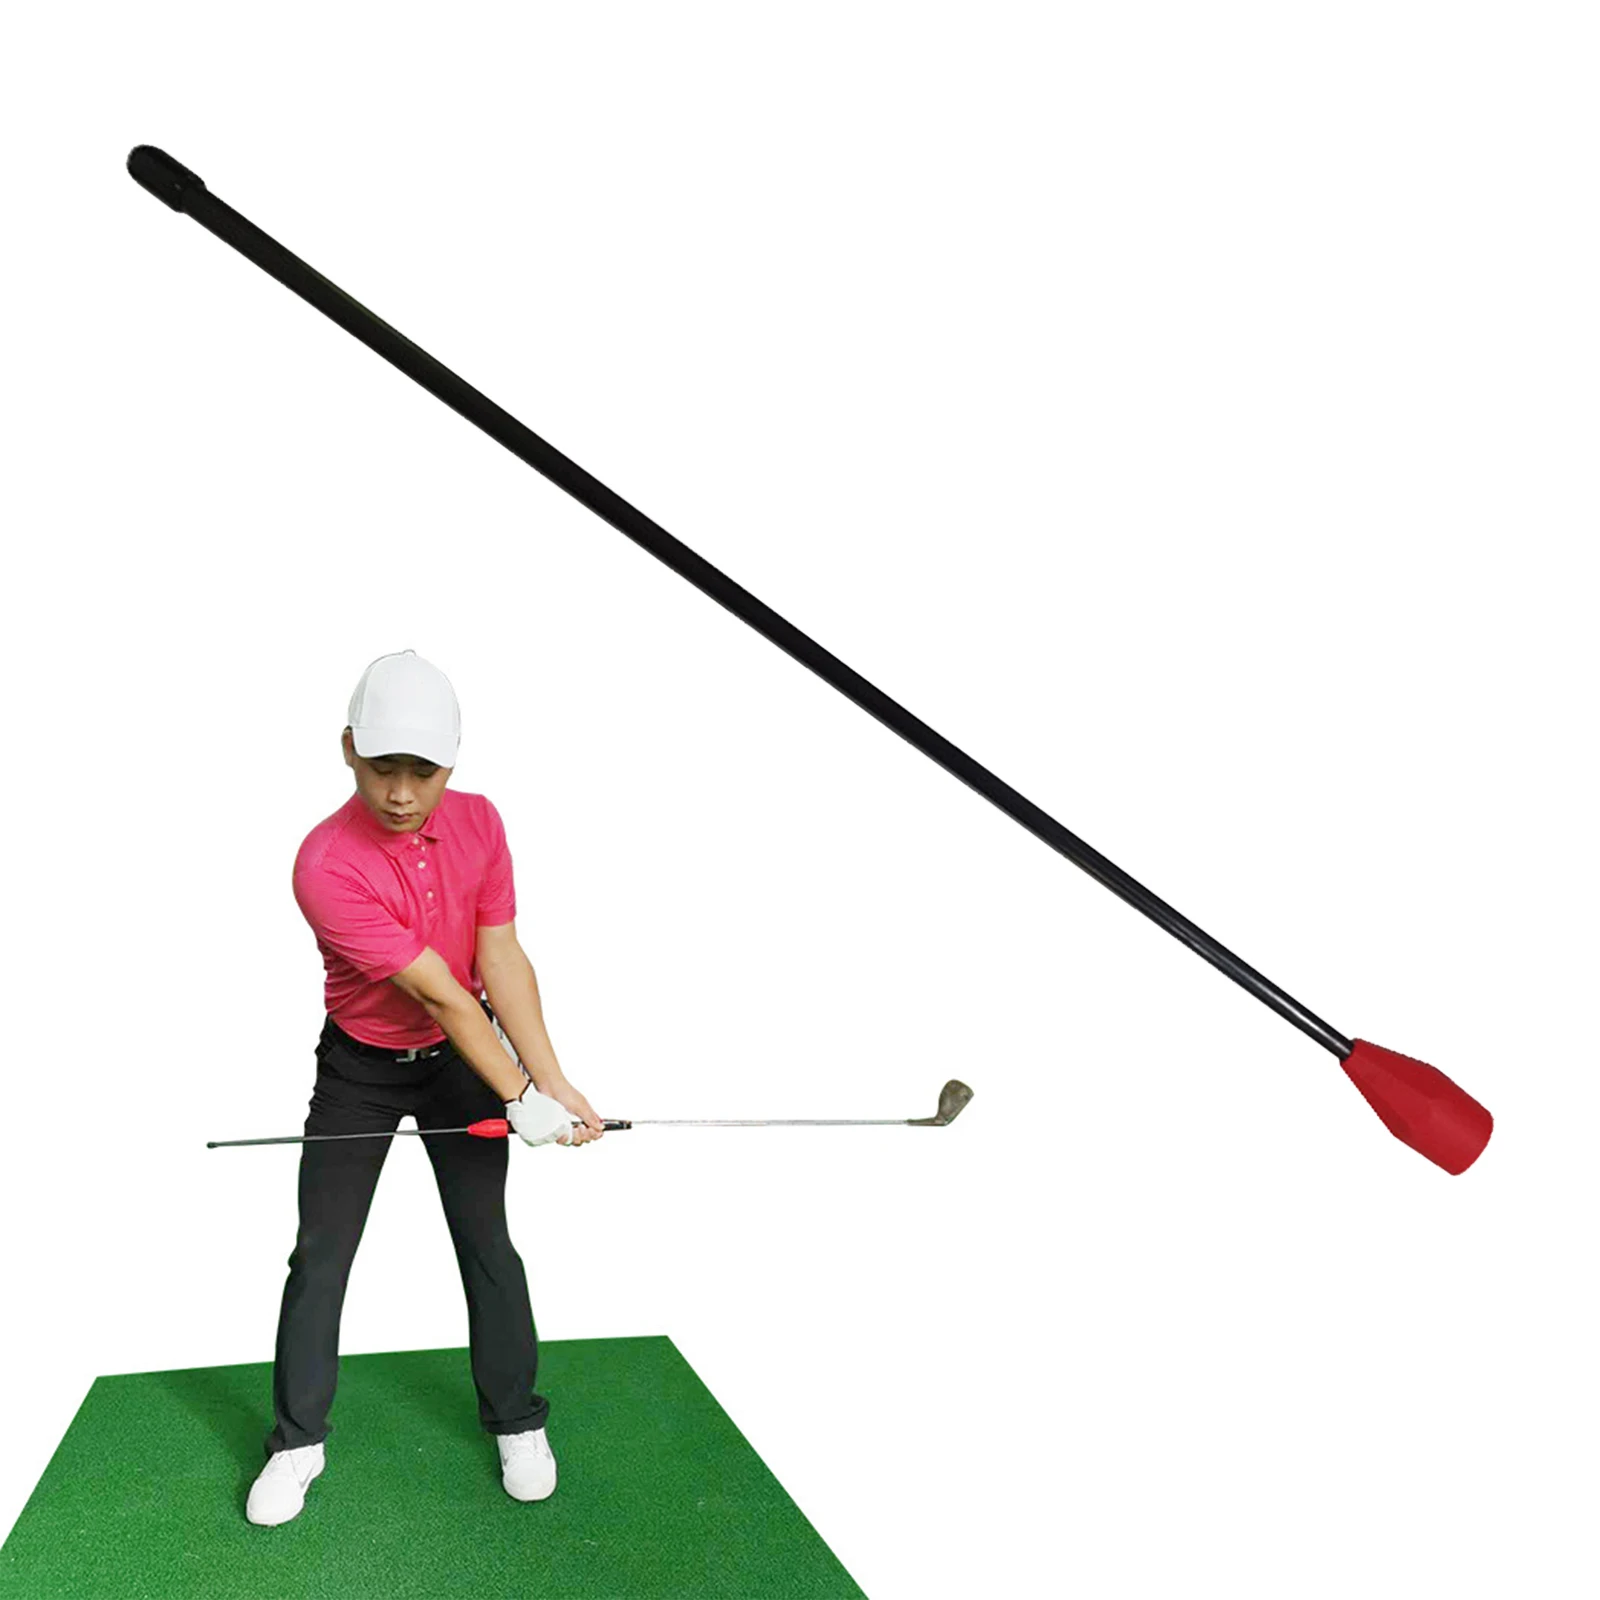 20 Inch Golf Swing Trainer Beginner Gesture Alignment Correction For Golf Beginners Golf Training Aids Practice Aid